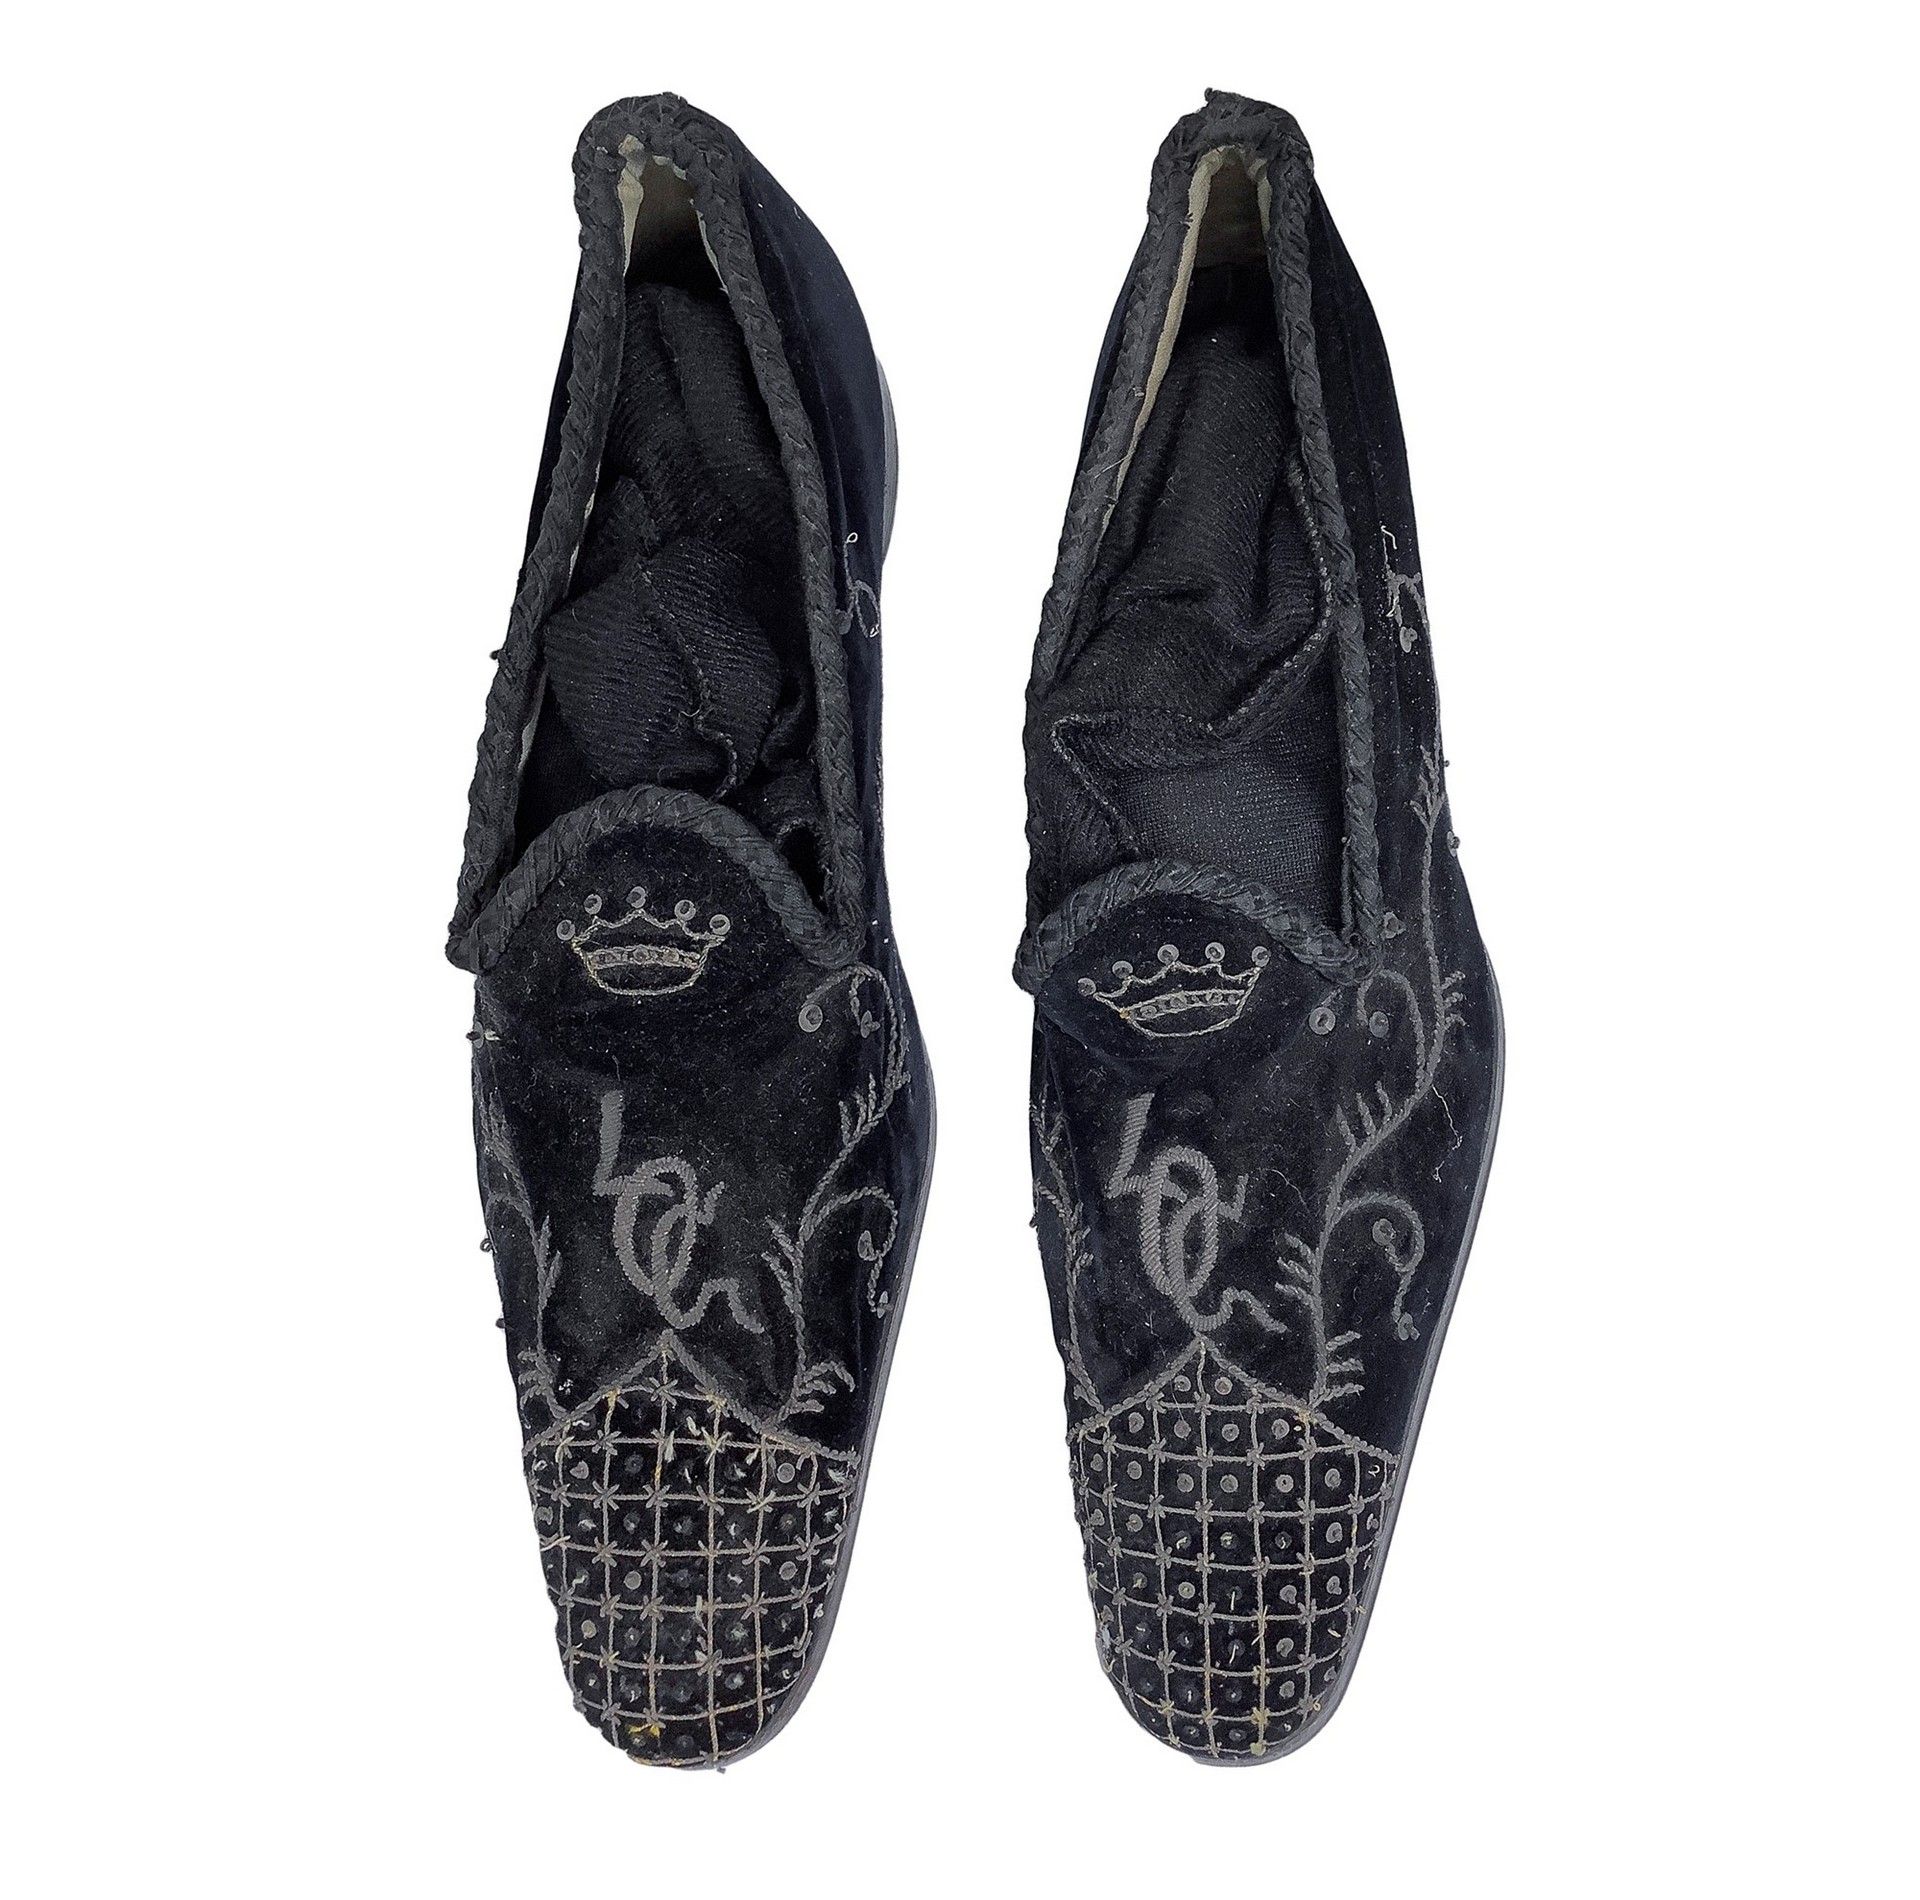 Null Vintage slippers shoes , Early 19th century Embroidered noble shoes